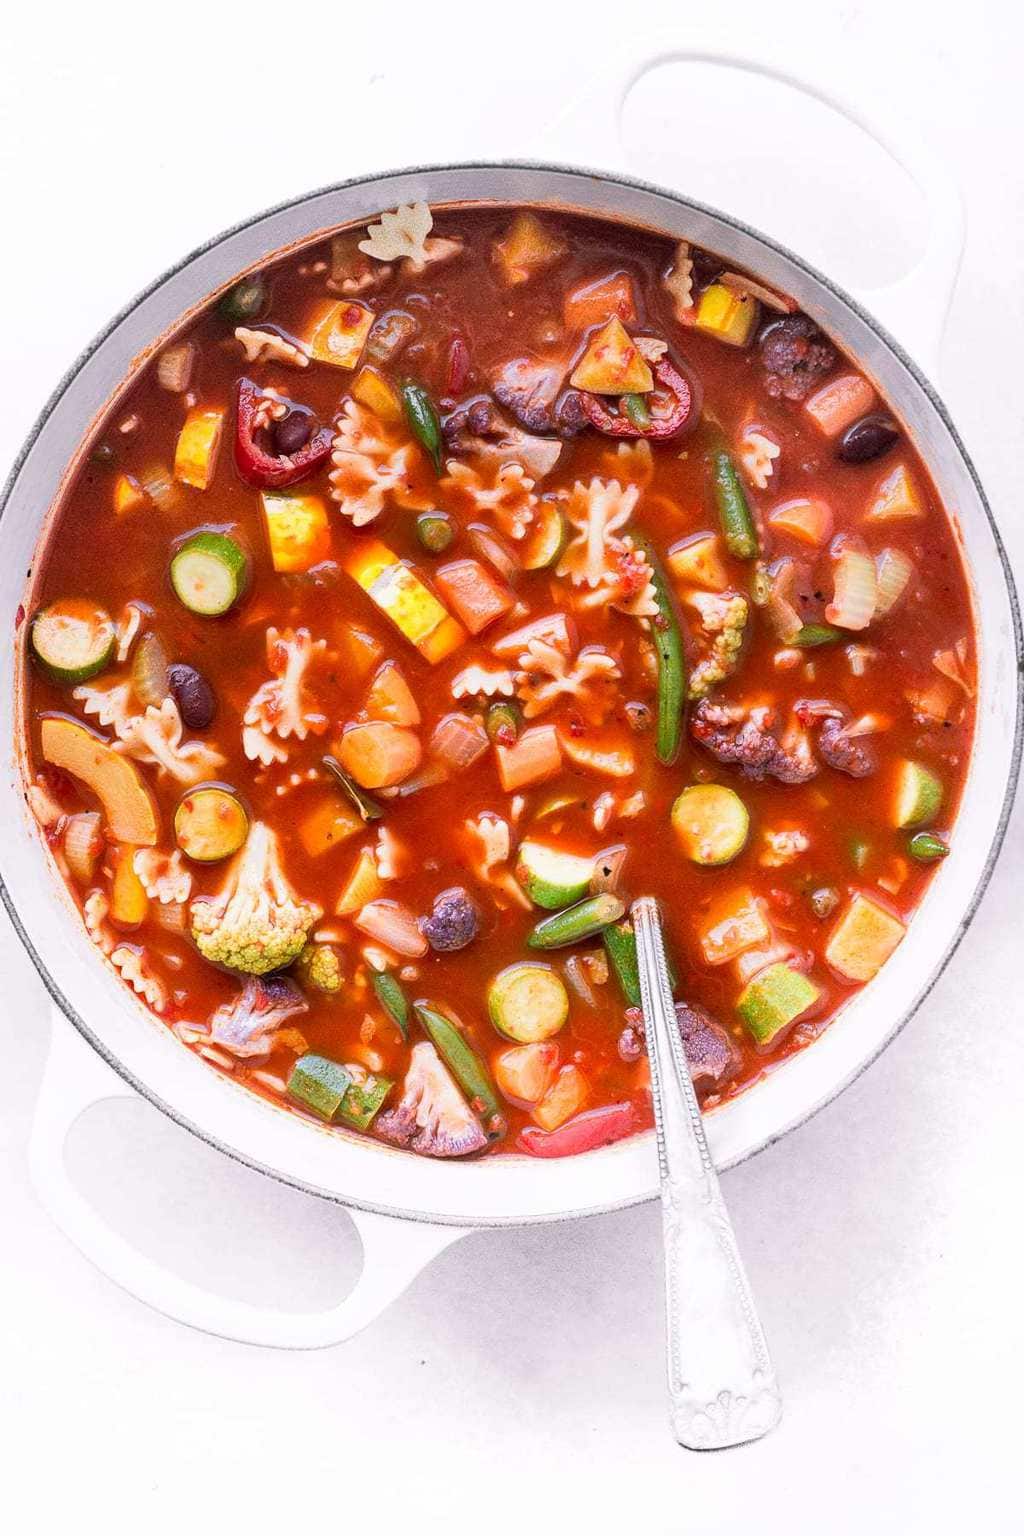 Overhead pictures of a big pot of Minestrone soup on a white background